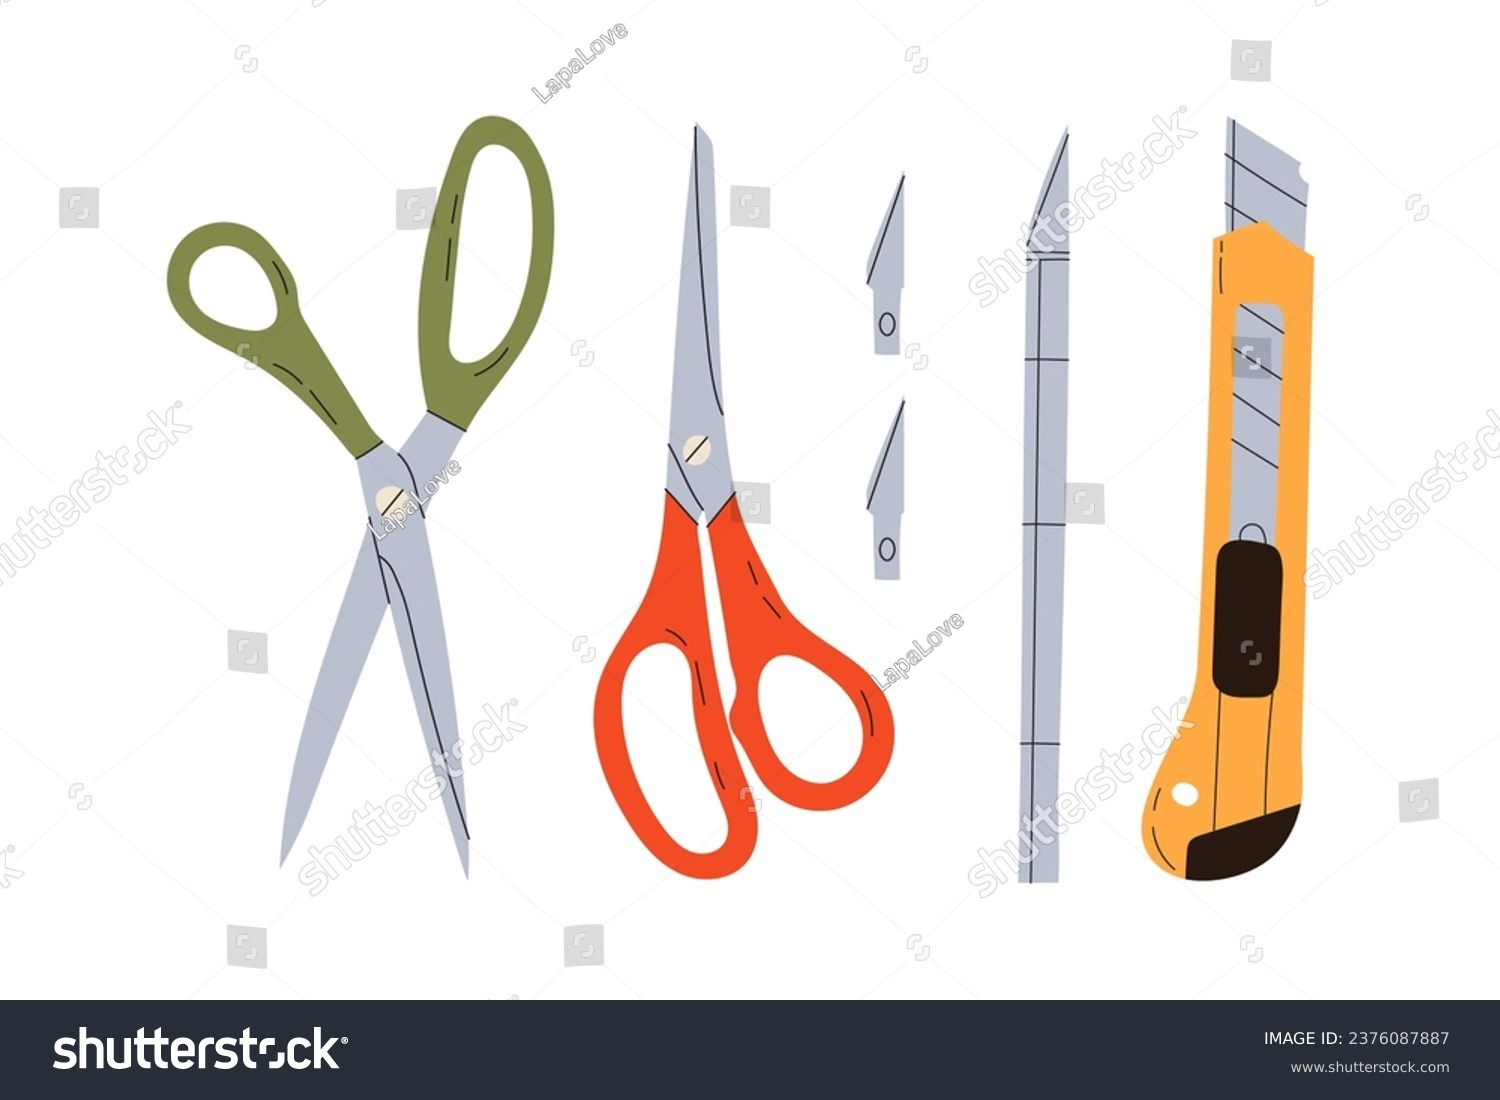 SVG of Stationery cutting supplies, scissors, breadboard knife, stationery knife in hand drawn style. Necessary elements for cutting paper. Scissors for cutting and sewing. Vector stock illustration. svg